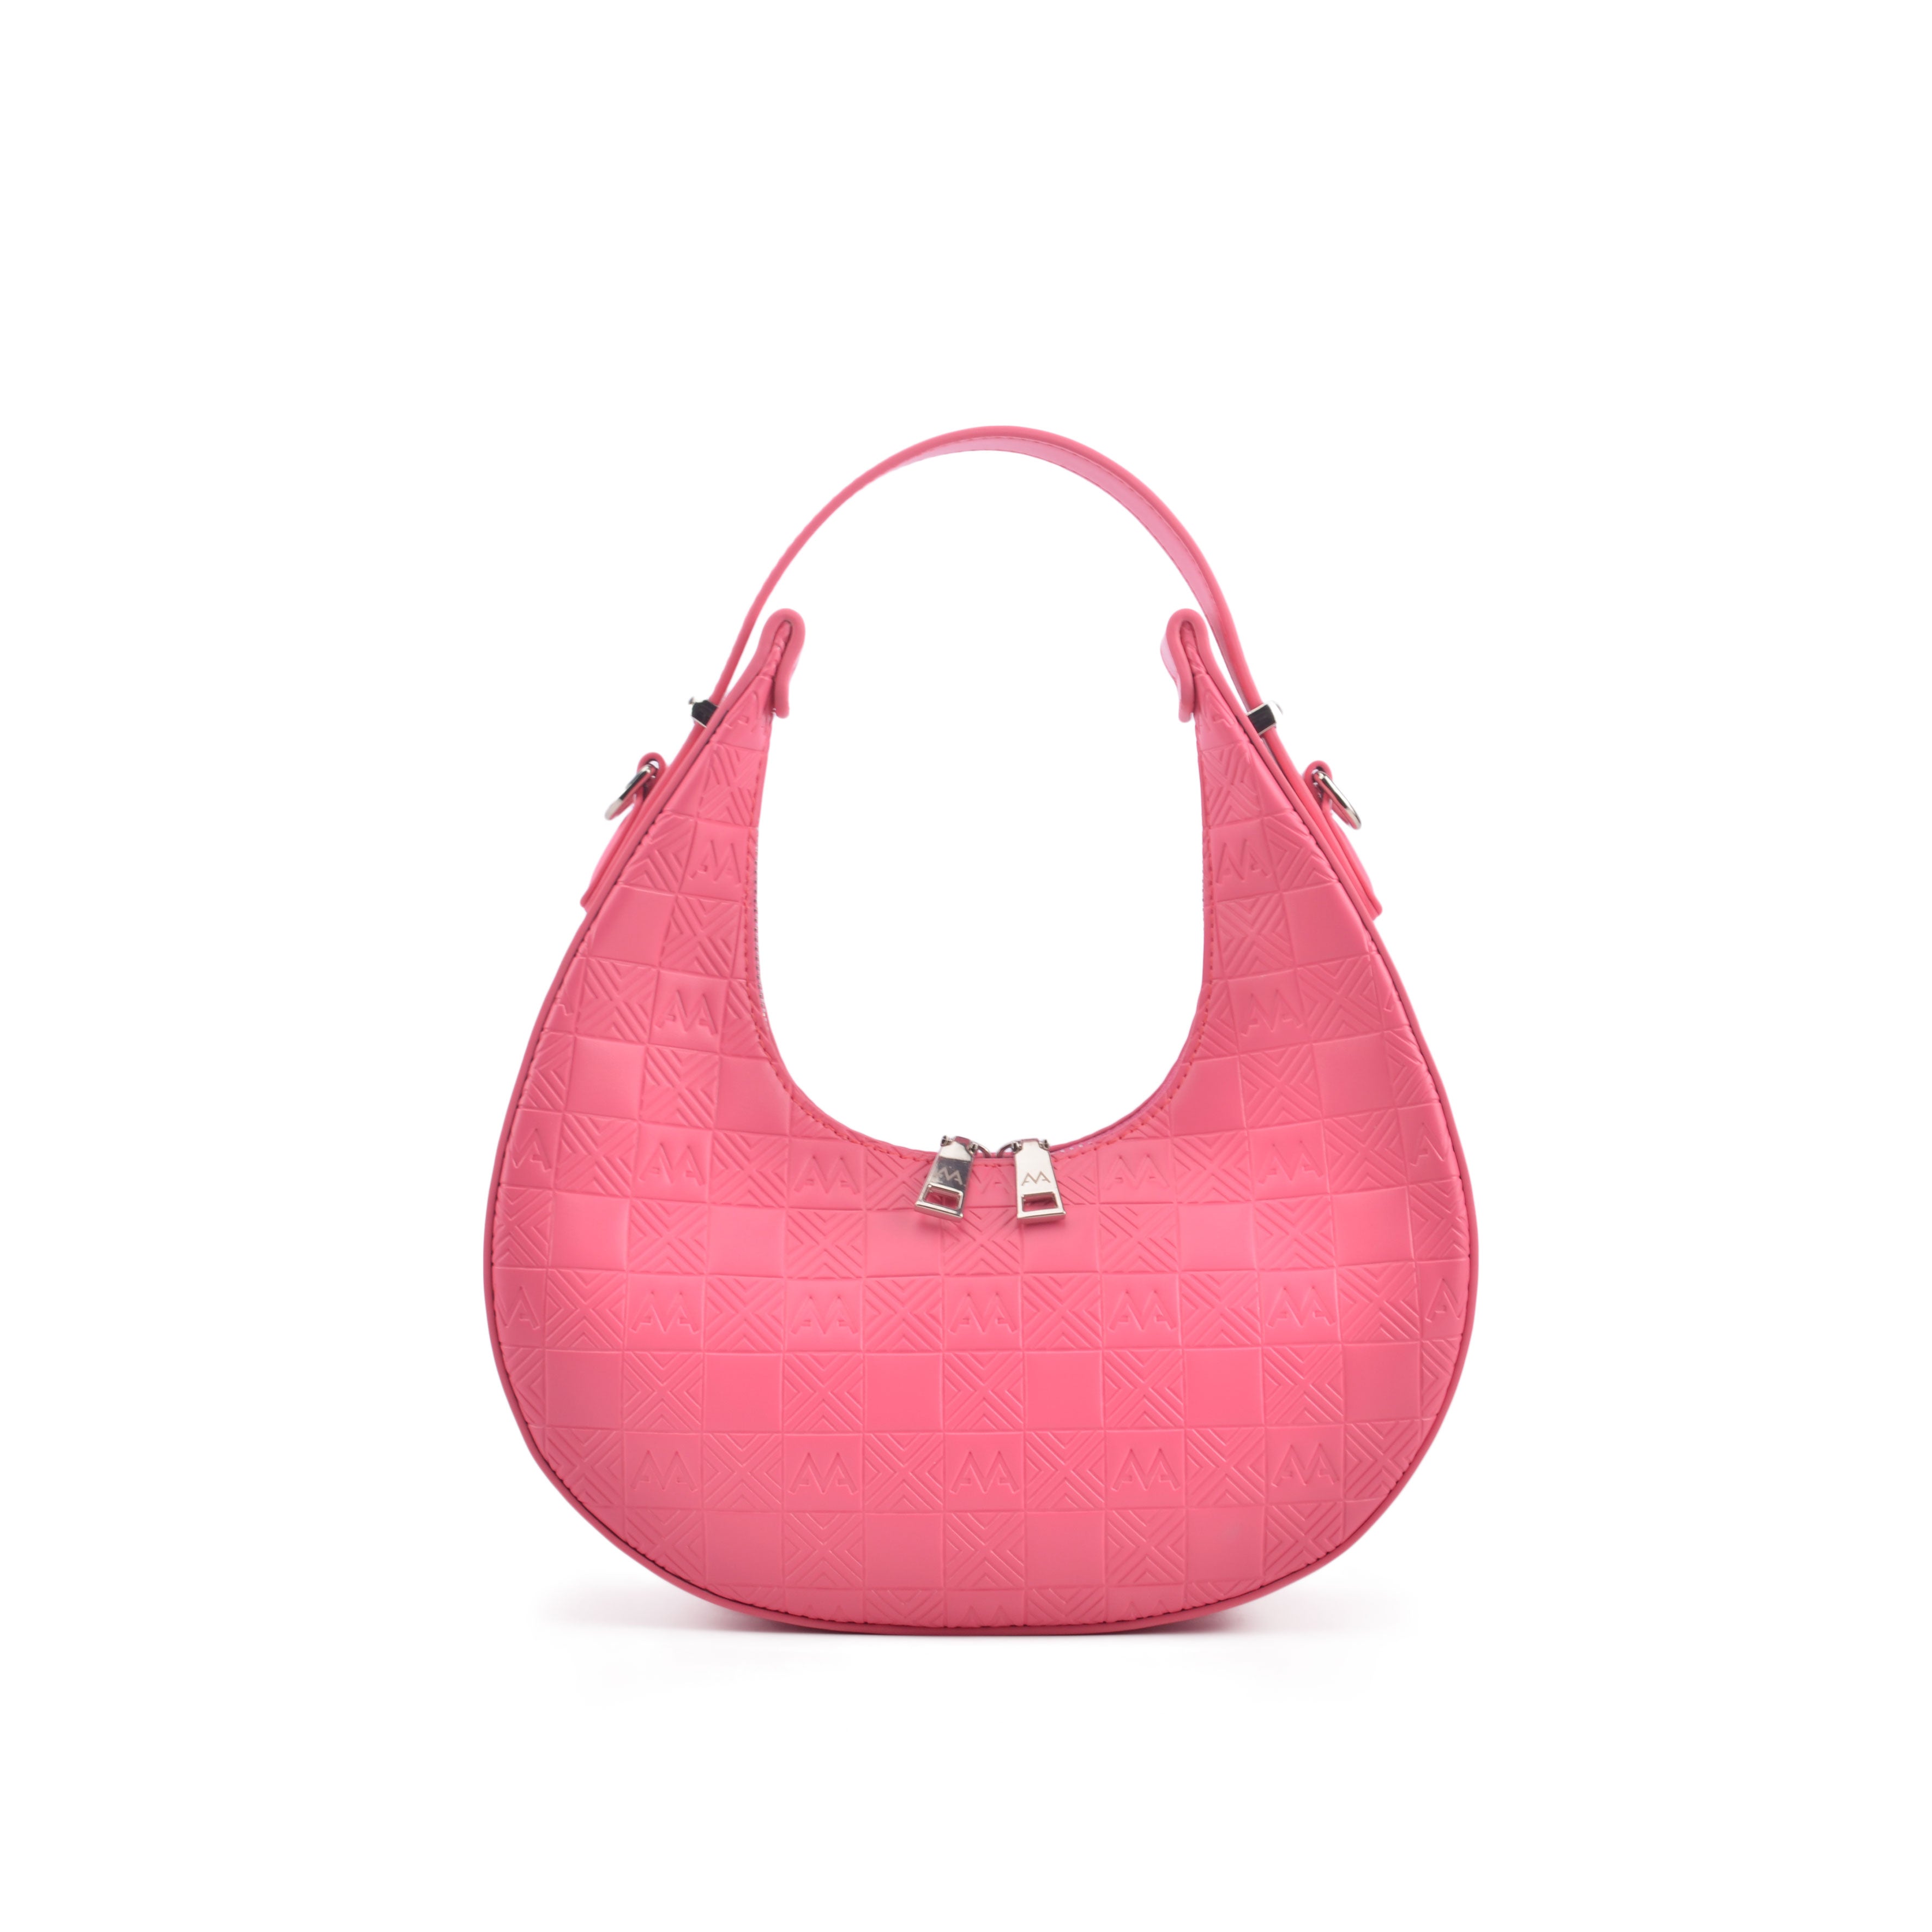 Up To 52% Off on MKP Hobo Bags Women Soft Purs... | Groupon Goods